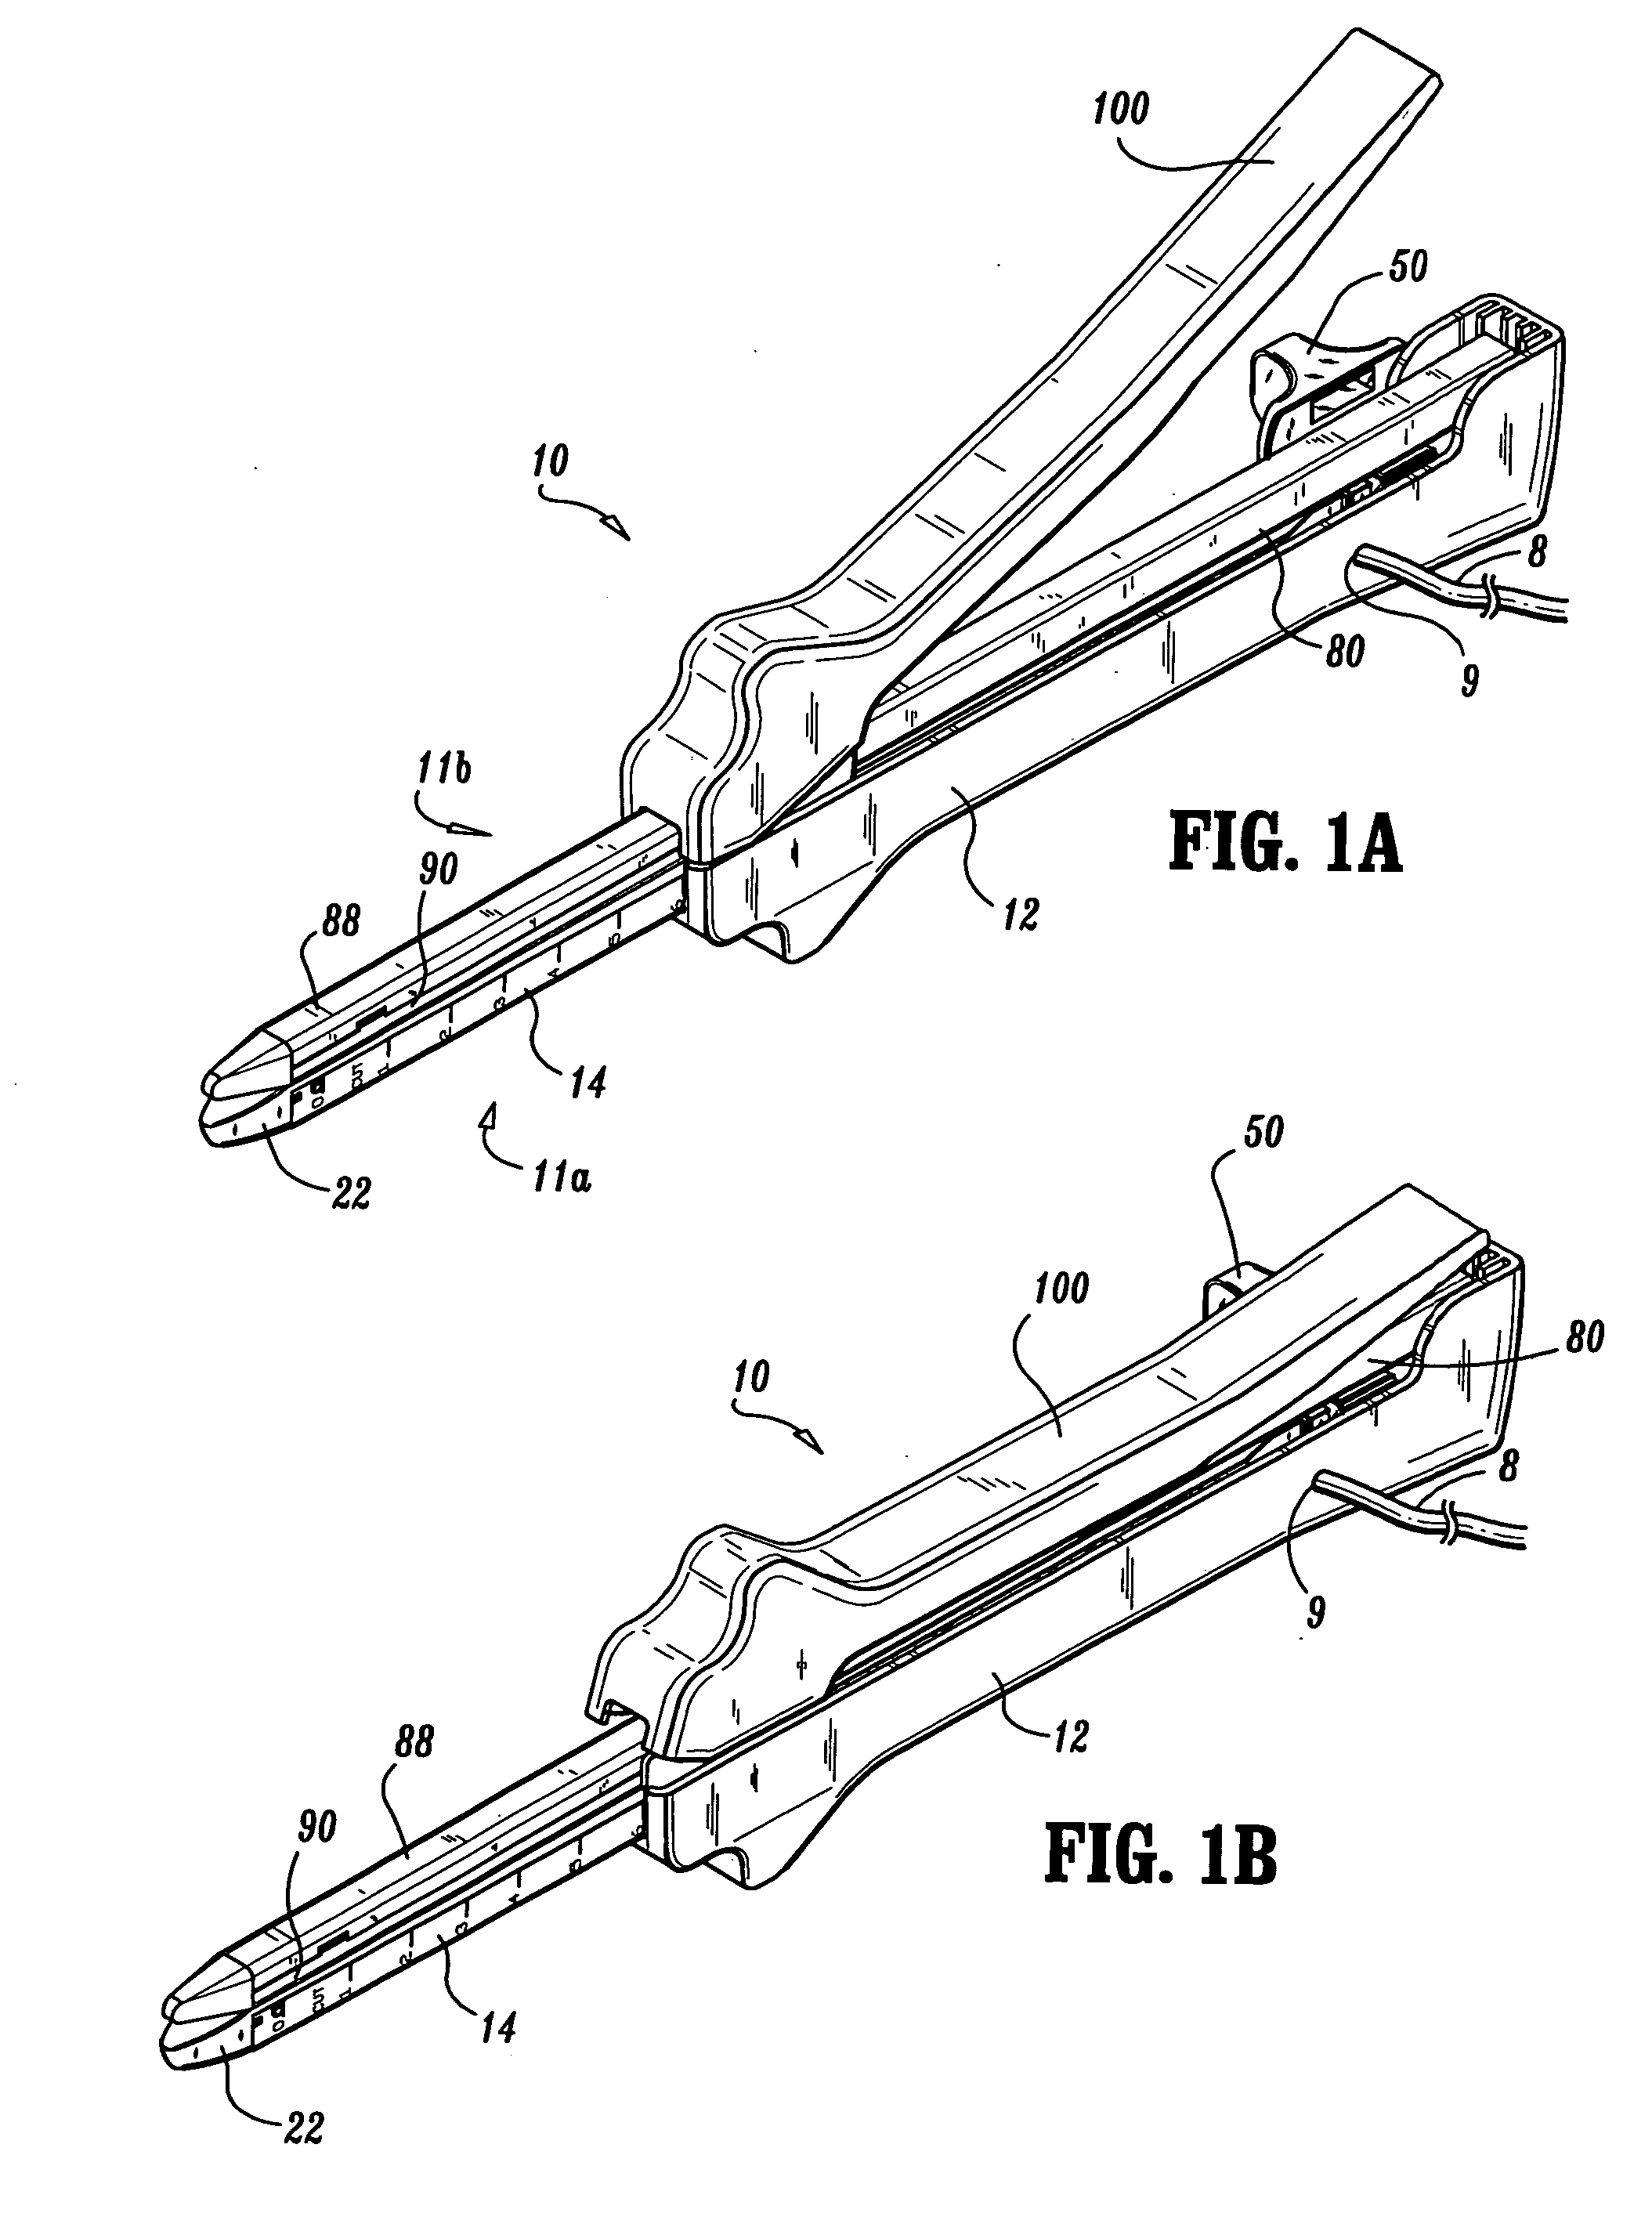 Wound closure material applicator and stapler